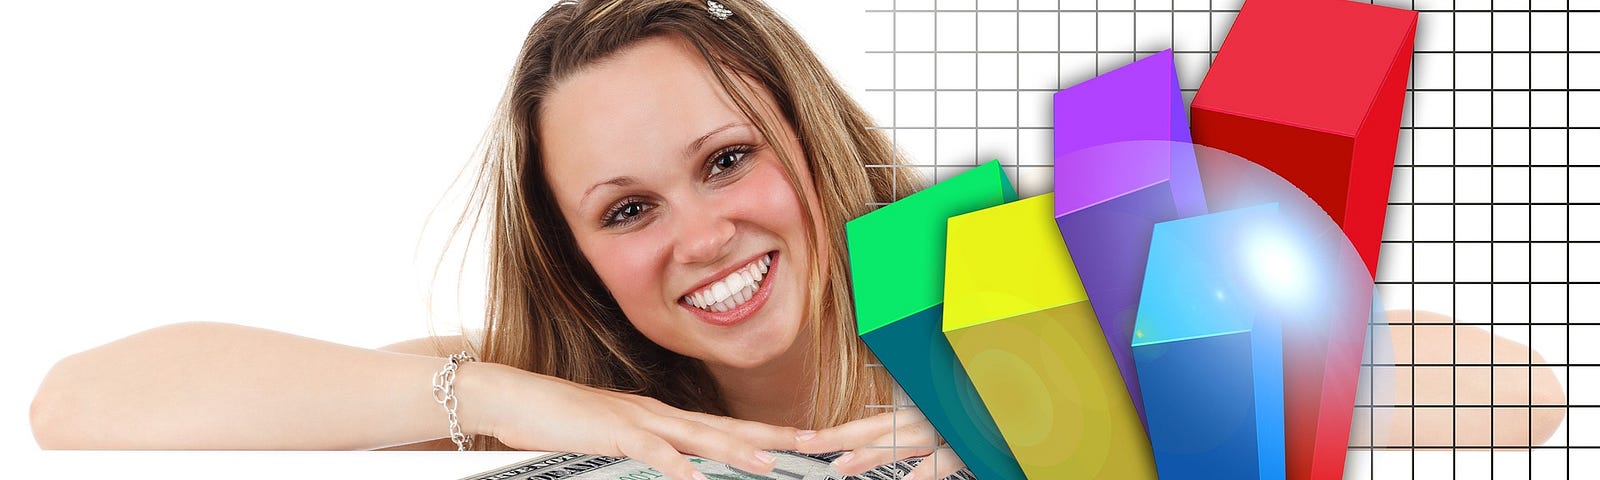 Cash spread out with bar graph and smiling woman